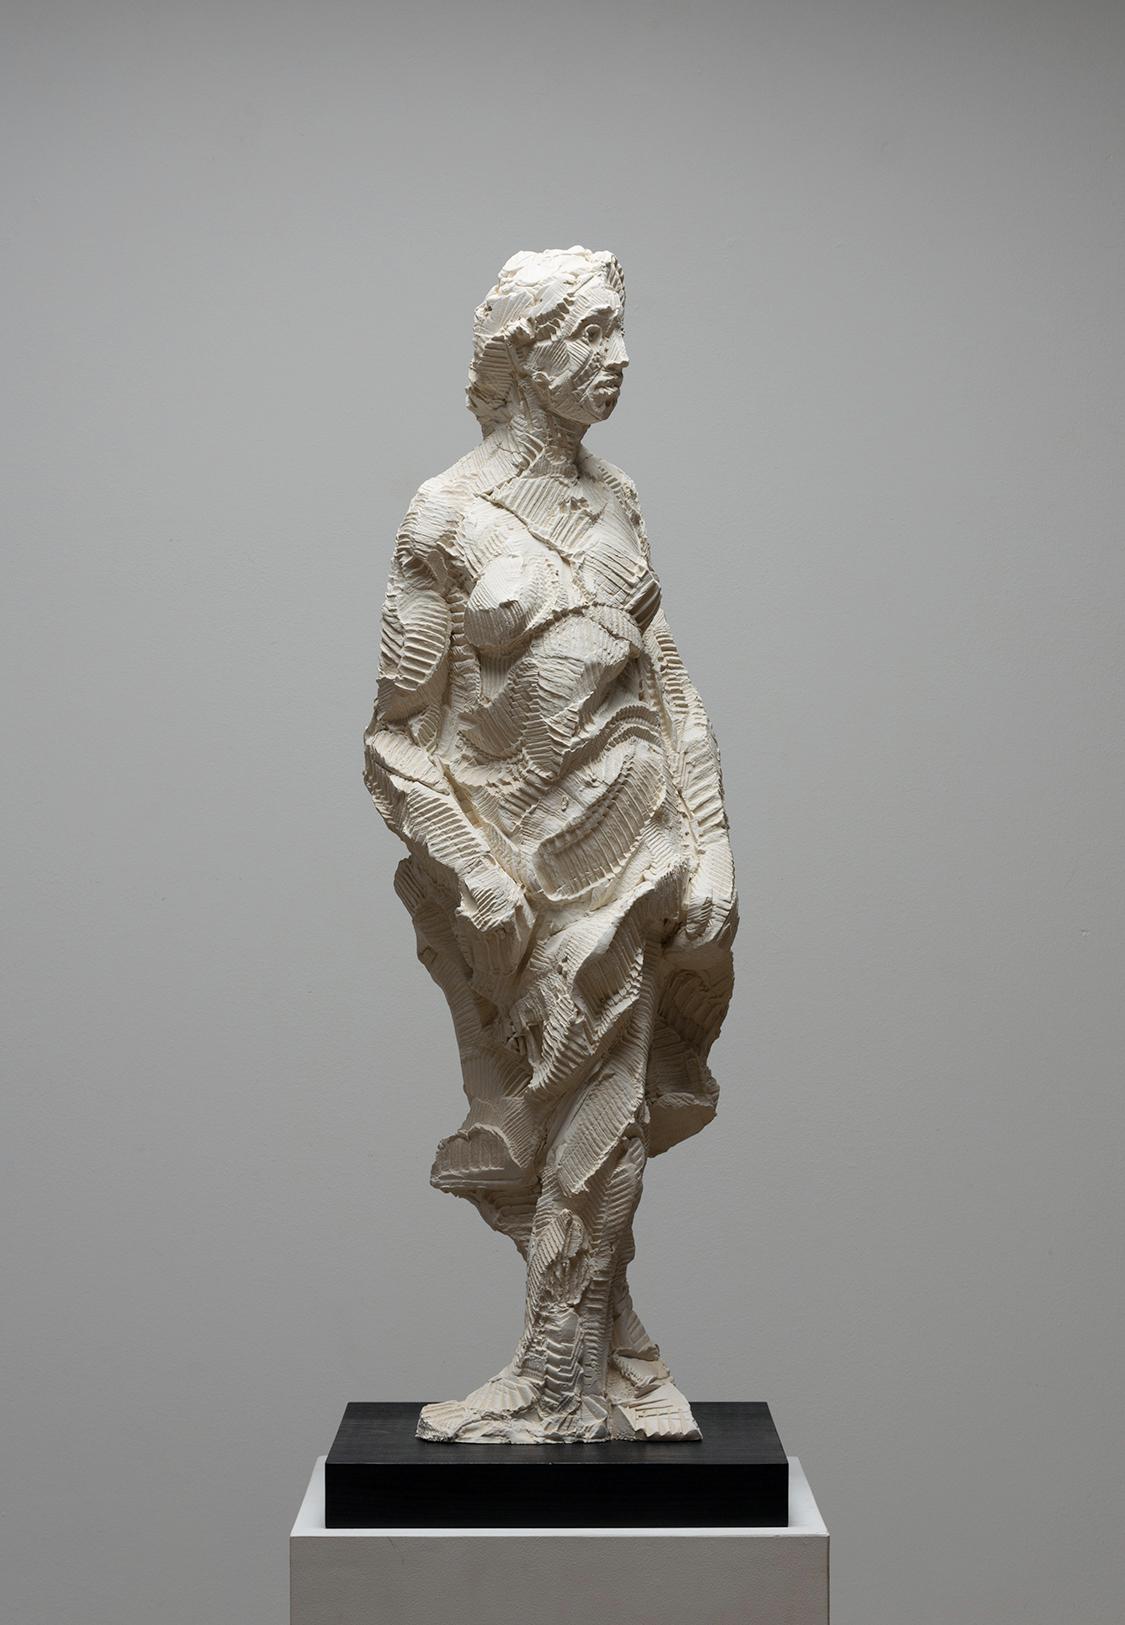 Michael O'Keefe Figurative Sculpture - Trembling in Impossibility